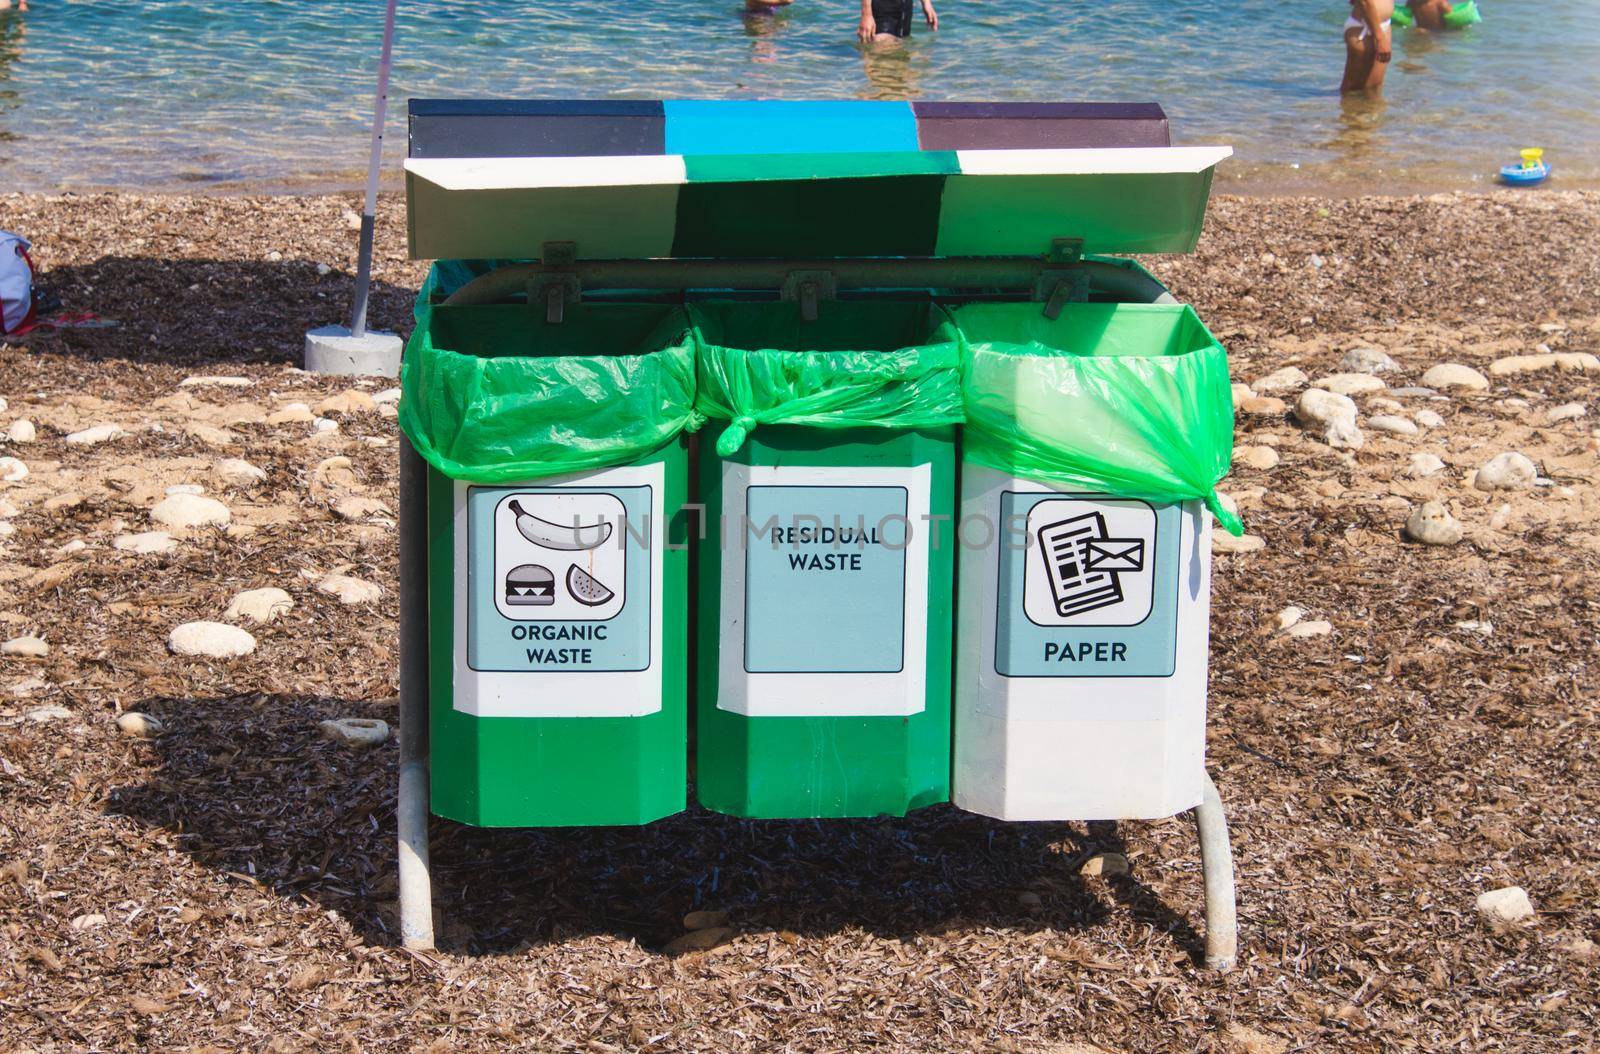 Recycling bins on a public natural beach